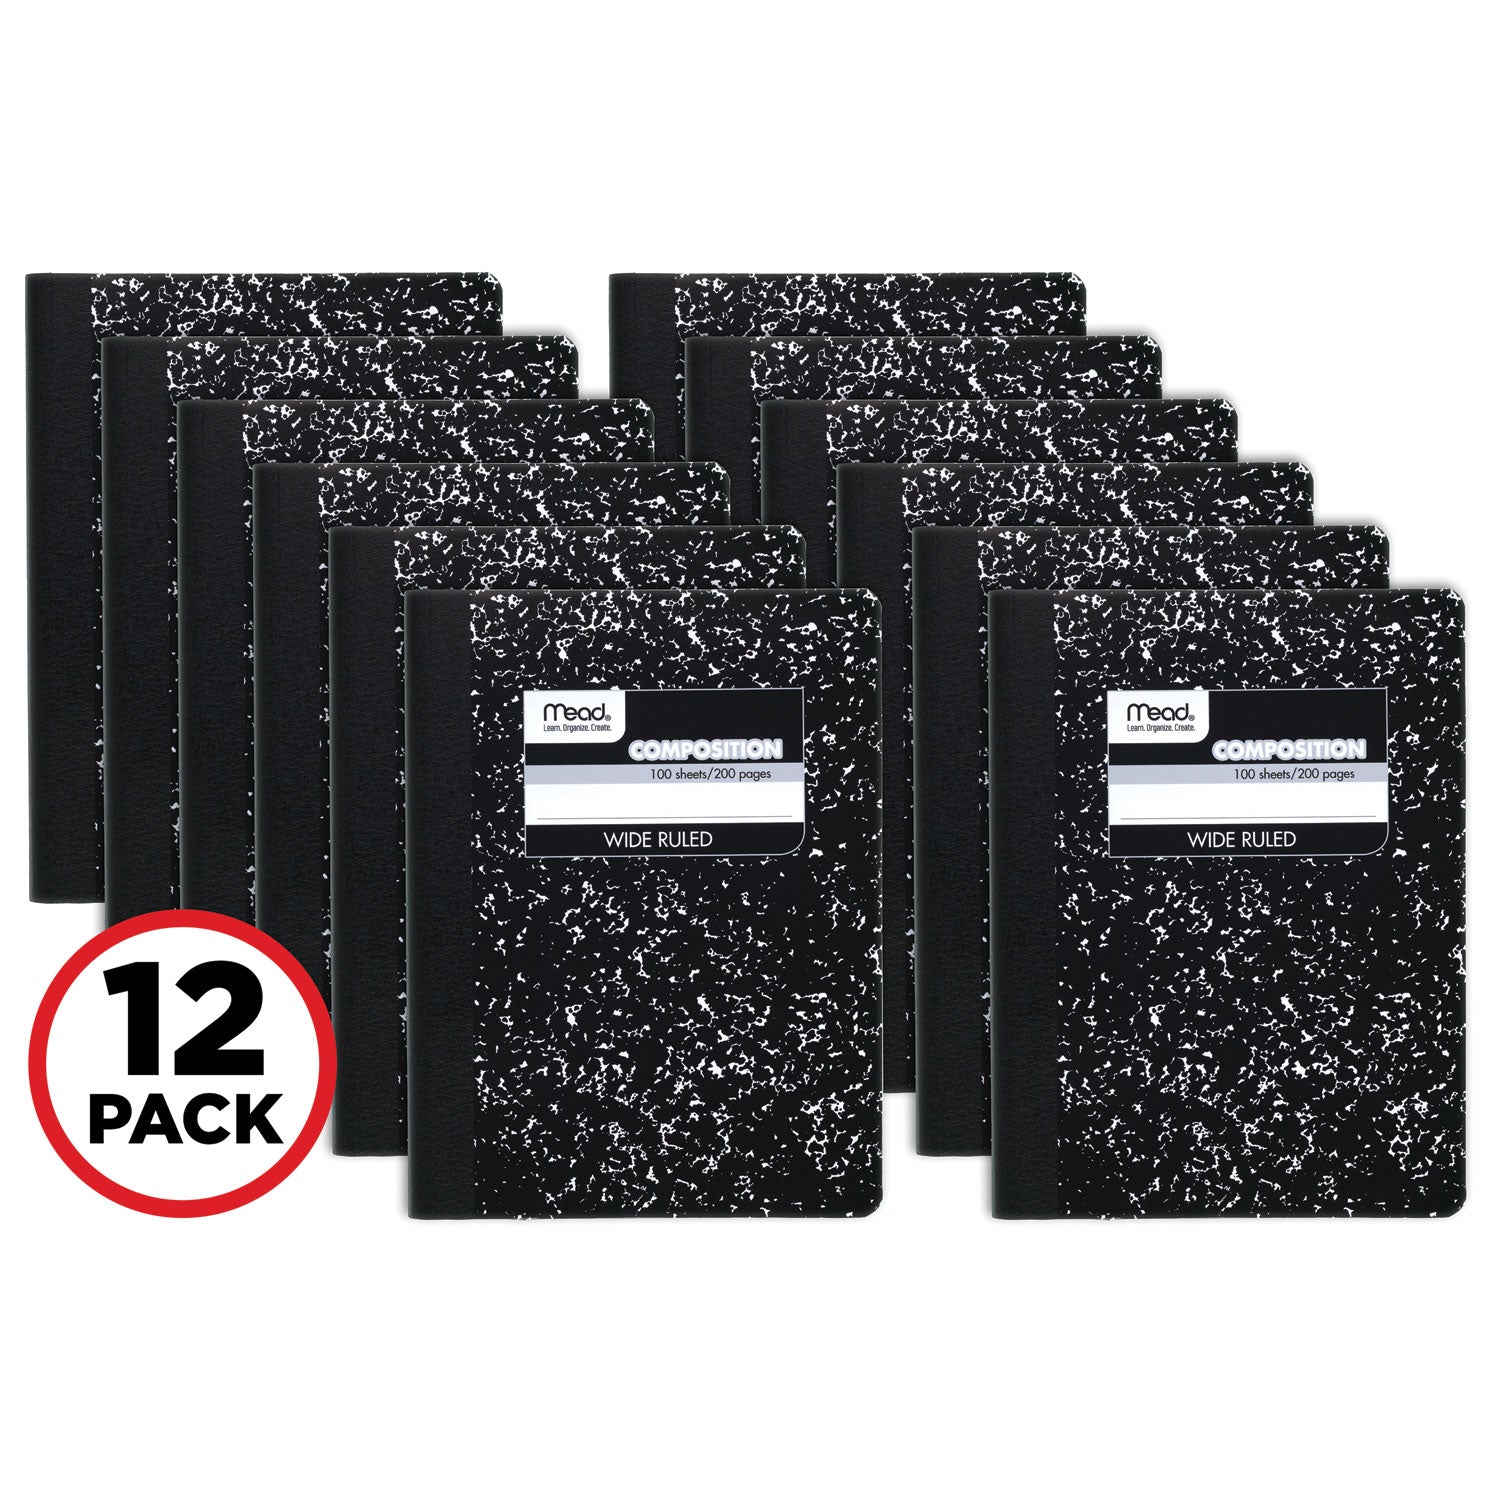 square-deal-composition-book-3-subject-wide-legal-rule-black-cover-100-975-x-75-sheets-12-pack_mea72936 - 1